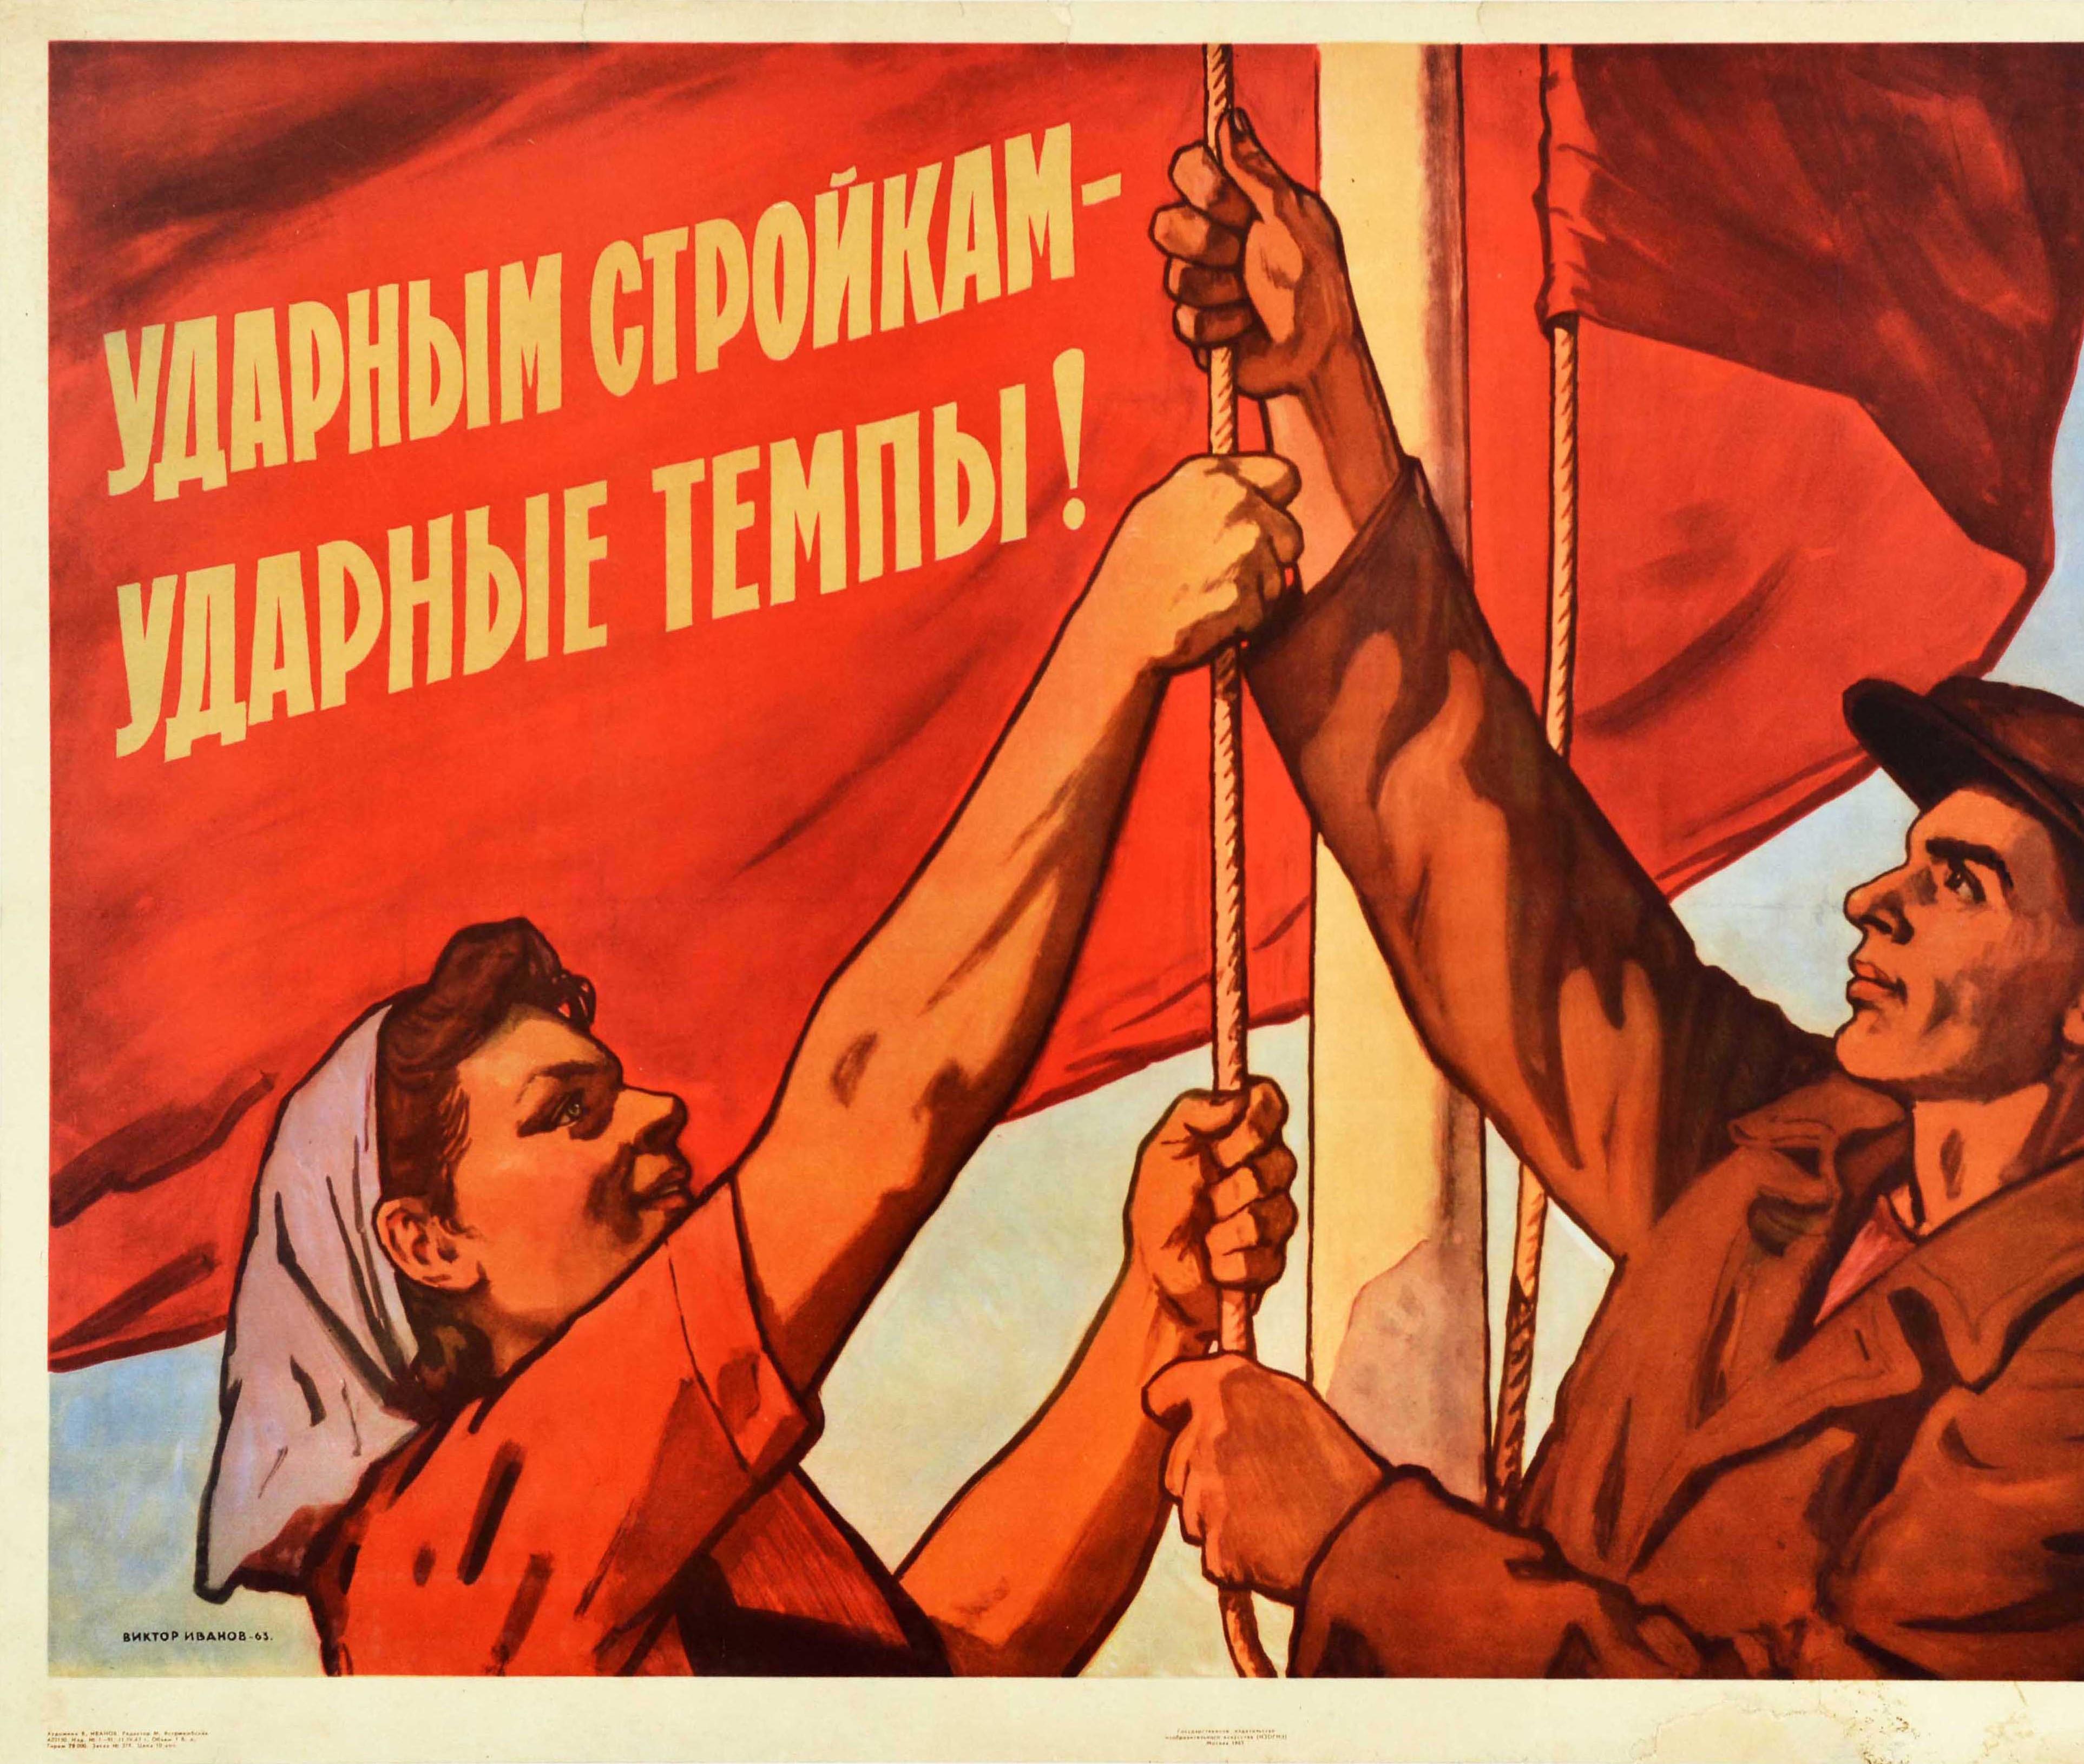 Original vintage Soviet propaganda poster - Shock construction projects Shock rates! Dynamic image of two workers raising a red banner flag with the text in bold yellow lettering on it, the man wearing a cap and the lady wearing a headscarf.